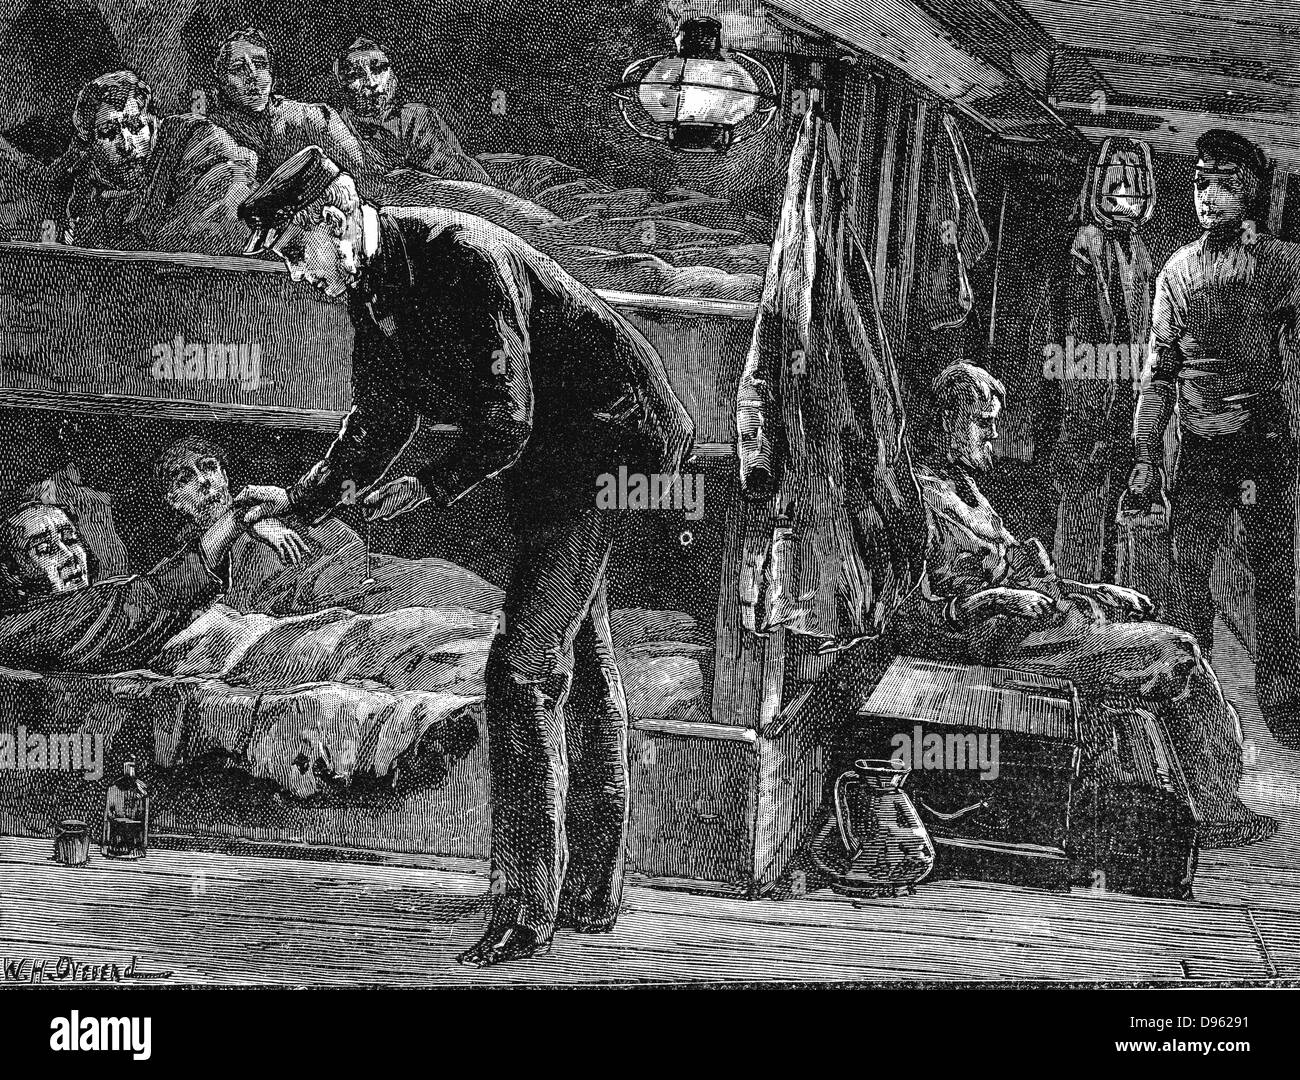 Taking the pulse of a sick Irish emigrant on board ship bound for North America during the potato famine of the 1840s. Wood engraving c1890. Stock Photo